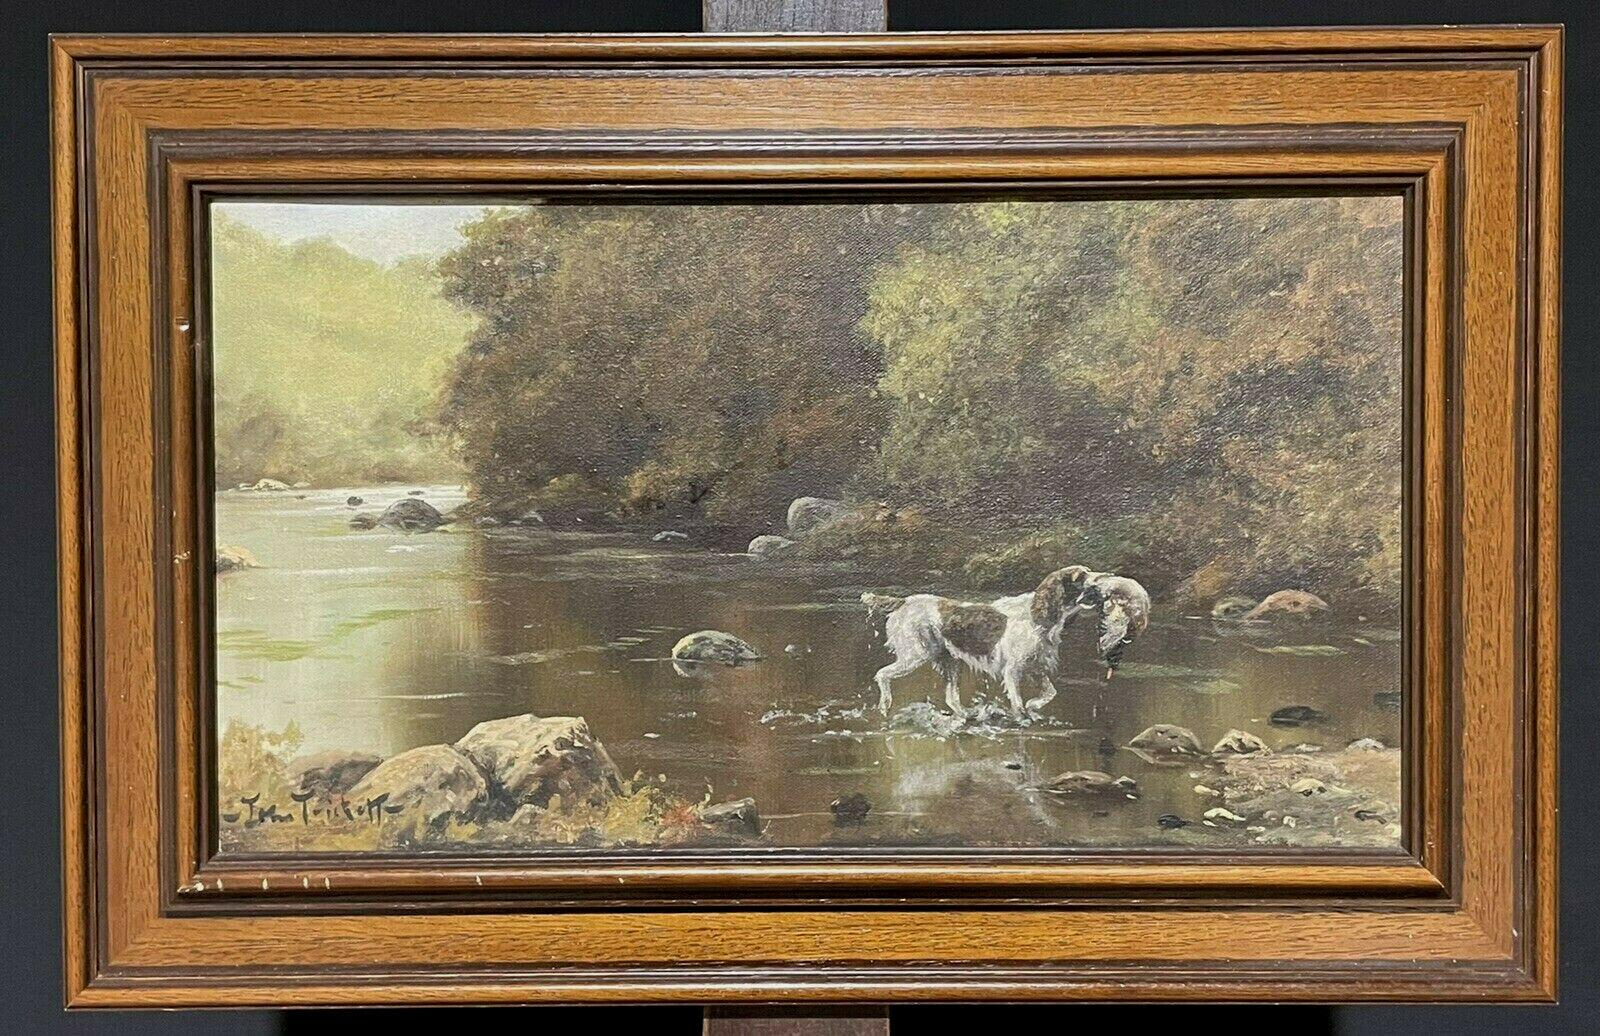 SIGNED ORIGINAL OIL - SPANIEL GUN DOG CARRYING GAME THROUGH RIVER LANDSCAPE - Painting by John Trickett